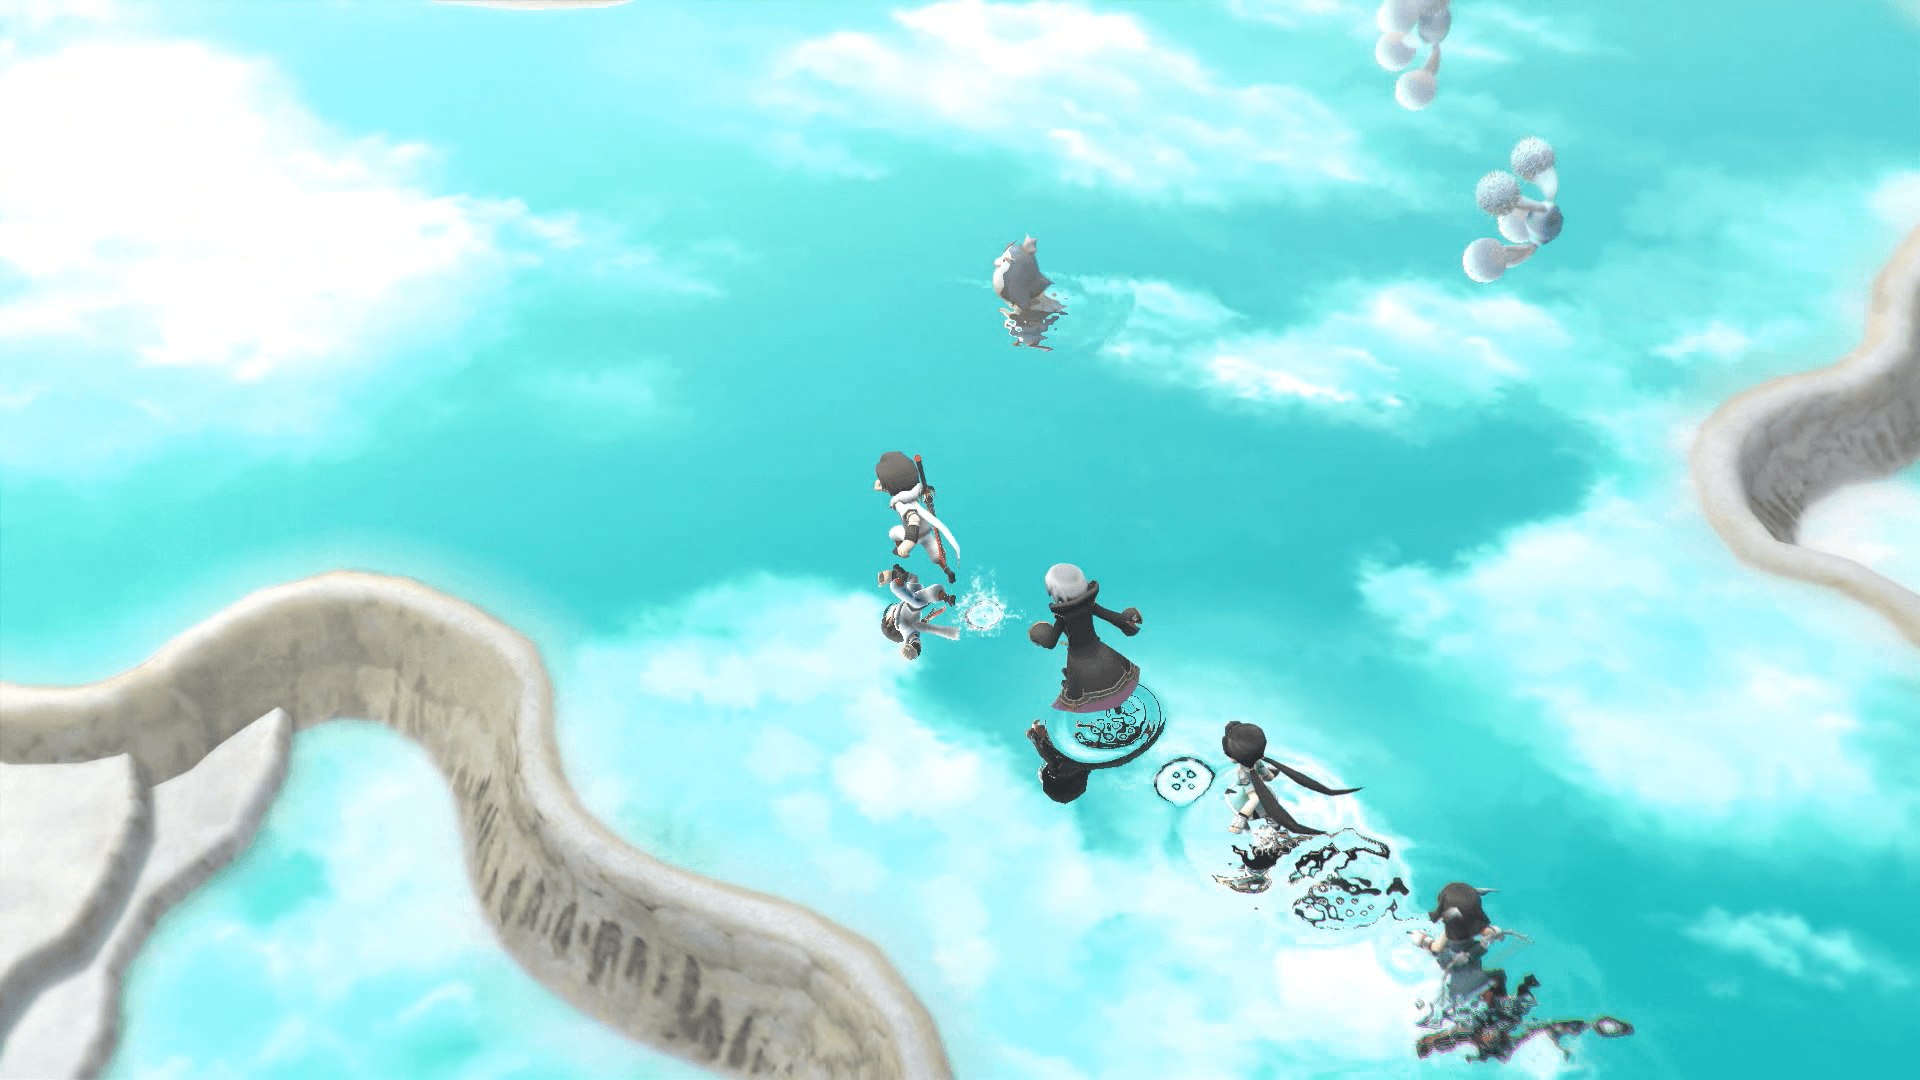 Kanata and co. try to Restore the World in the new Lost Sphear